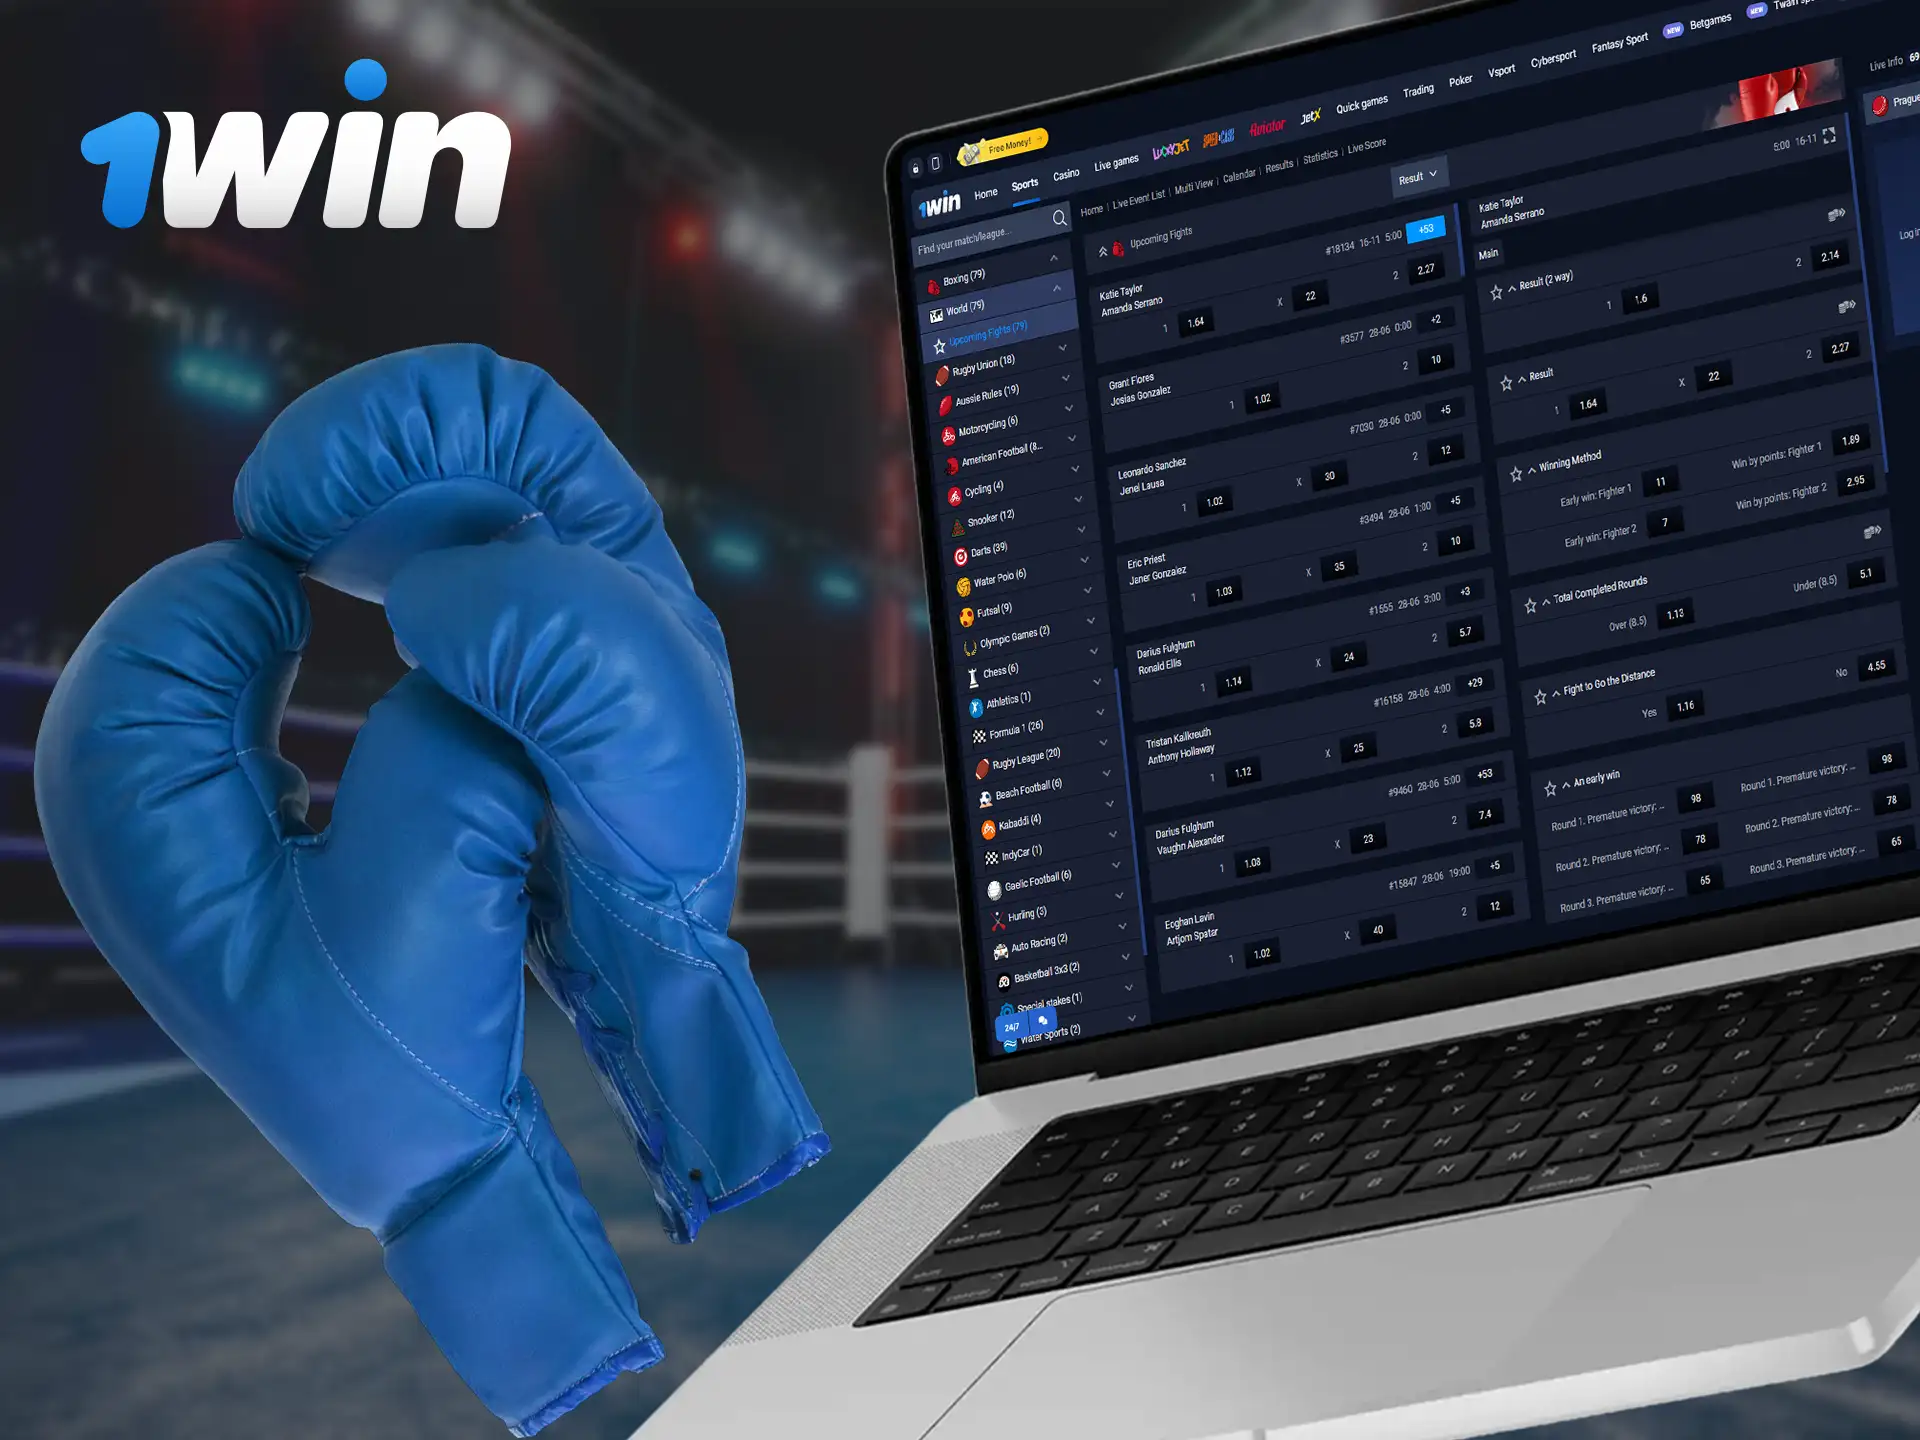 Follow all boxing events and place your bets at 1Win.